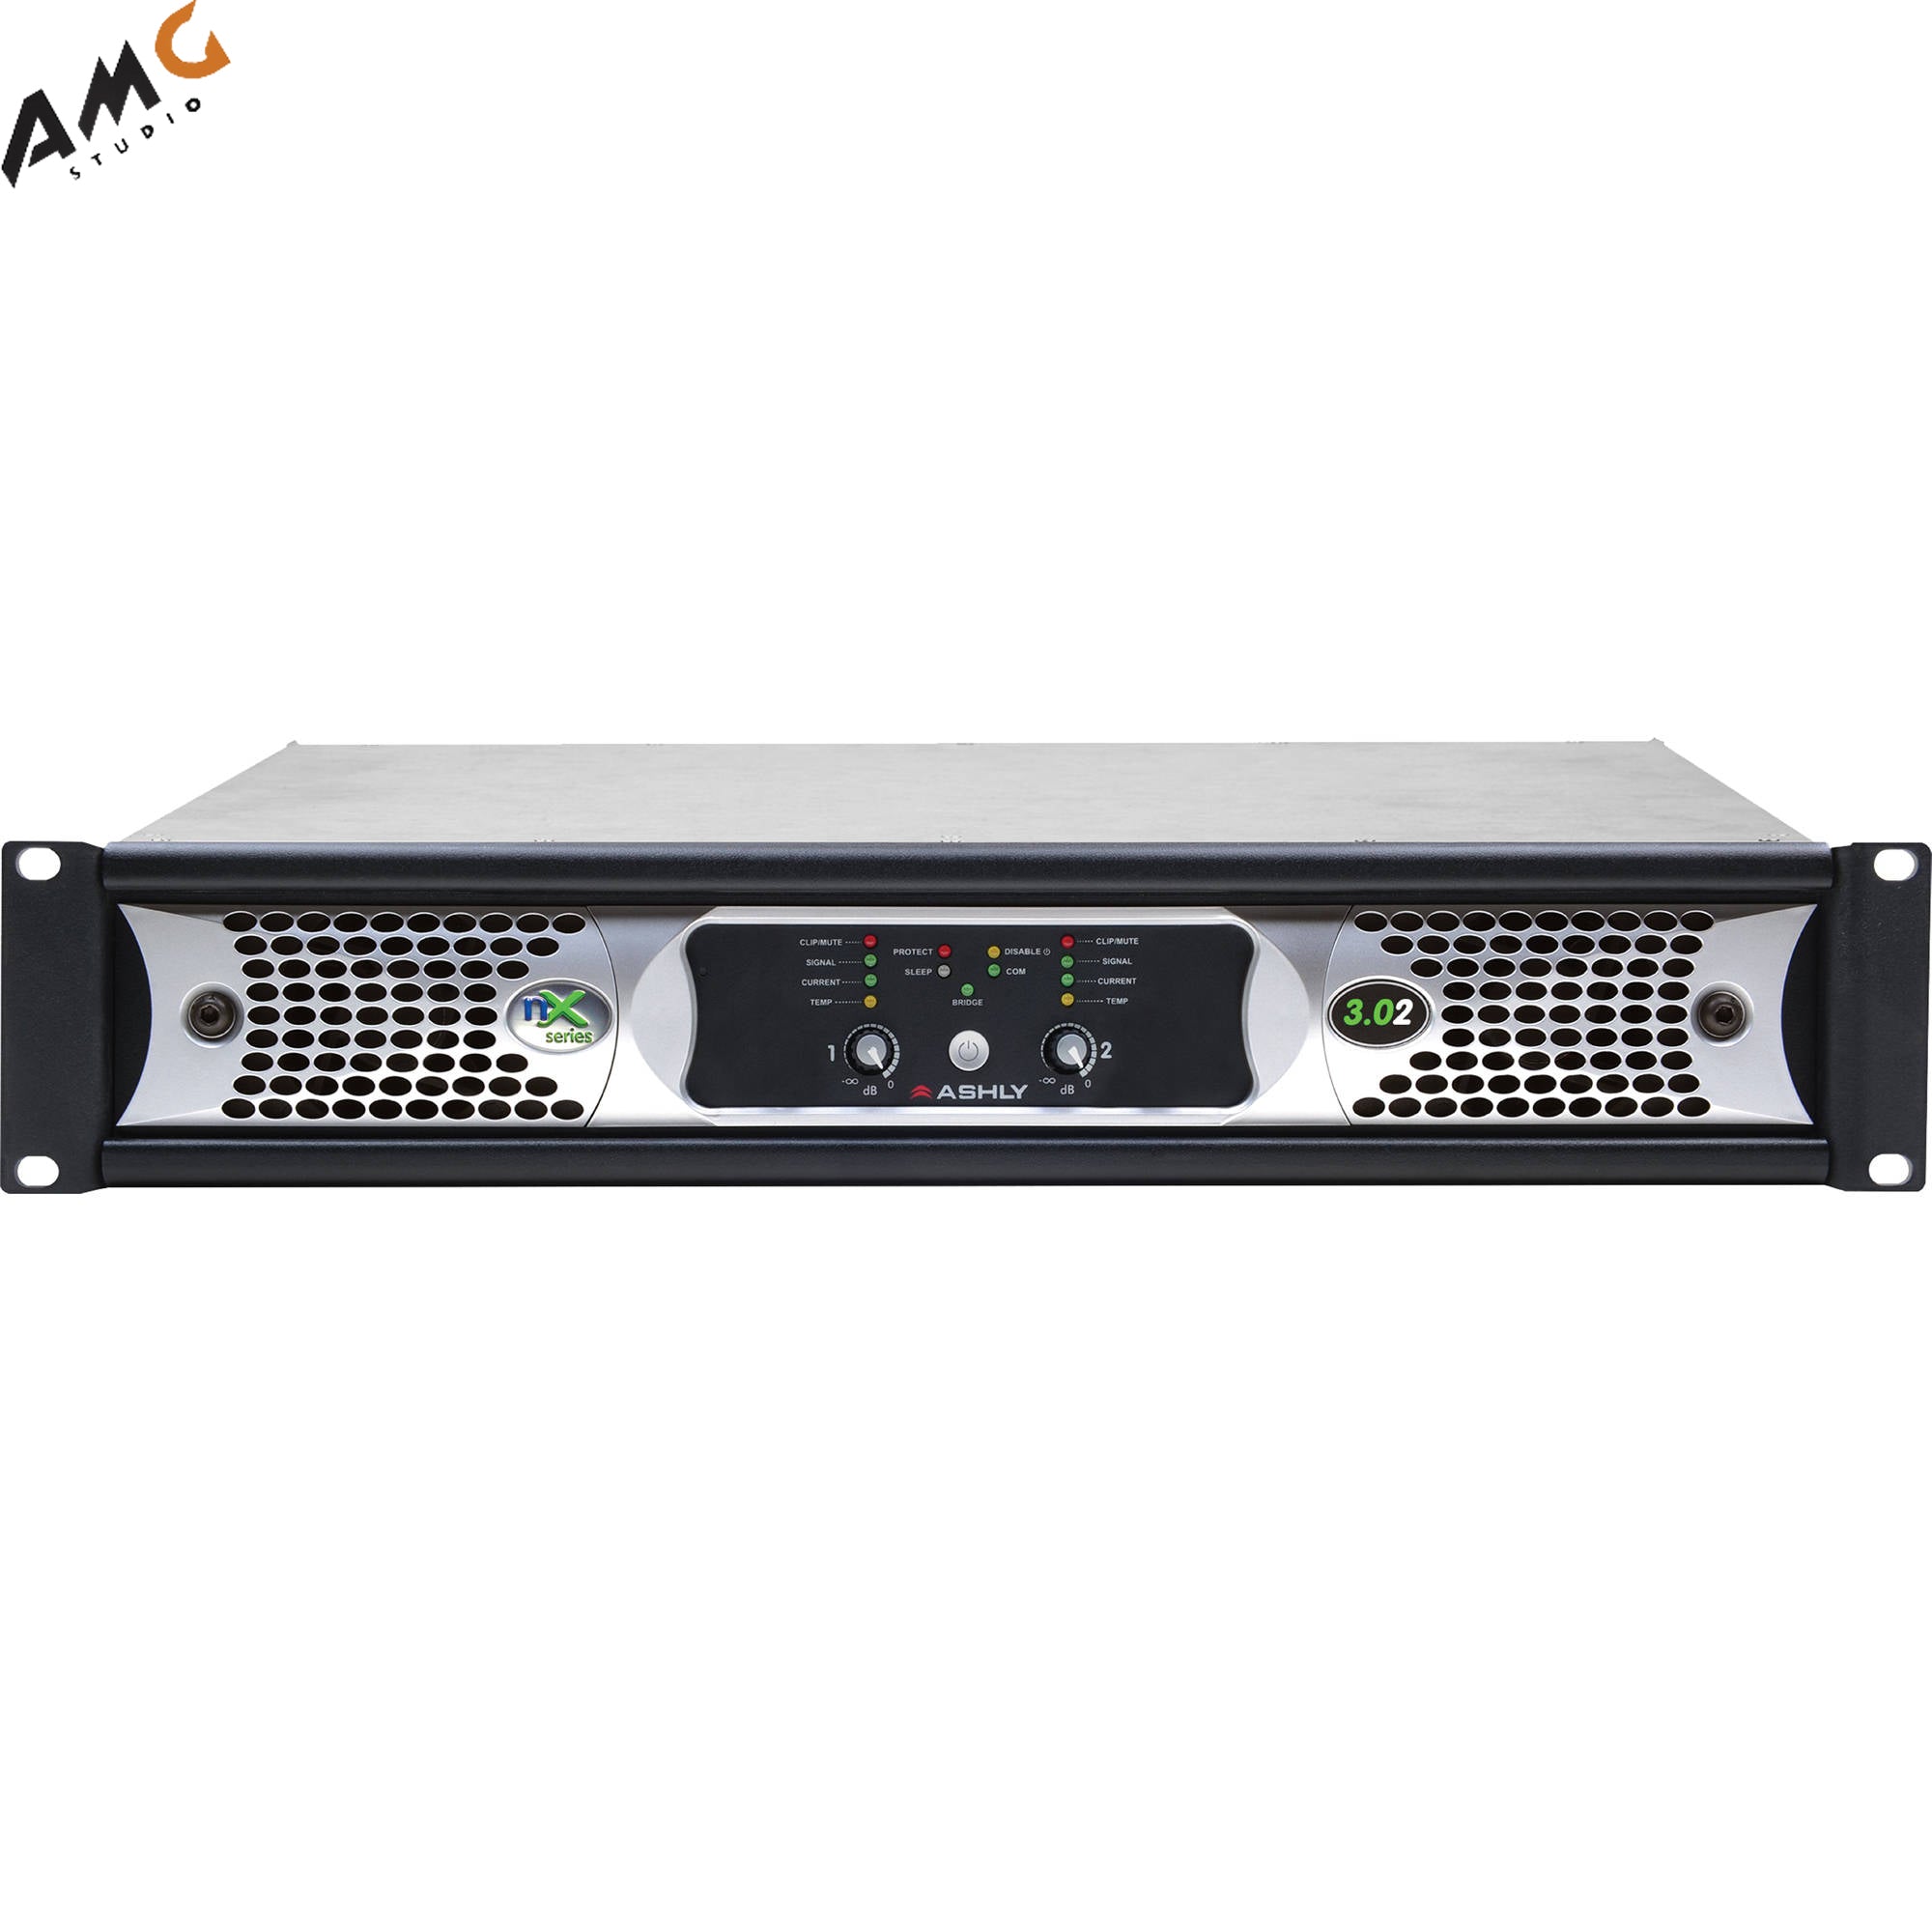 Ashly nX3.02 Power Amplifier 2 x 3000 Watts/2 Ohms with Programmable Outputs - Studio AMG